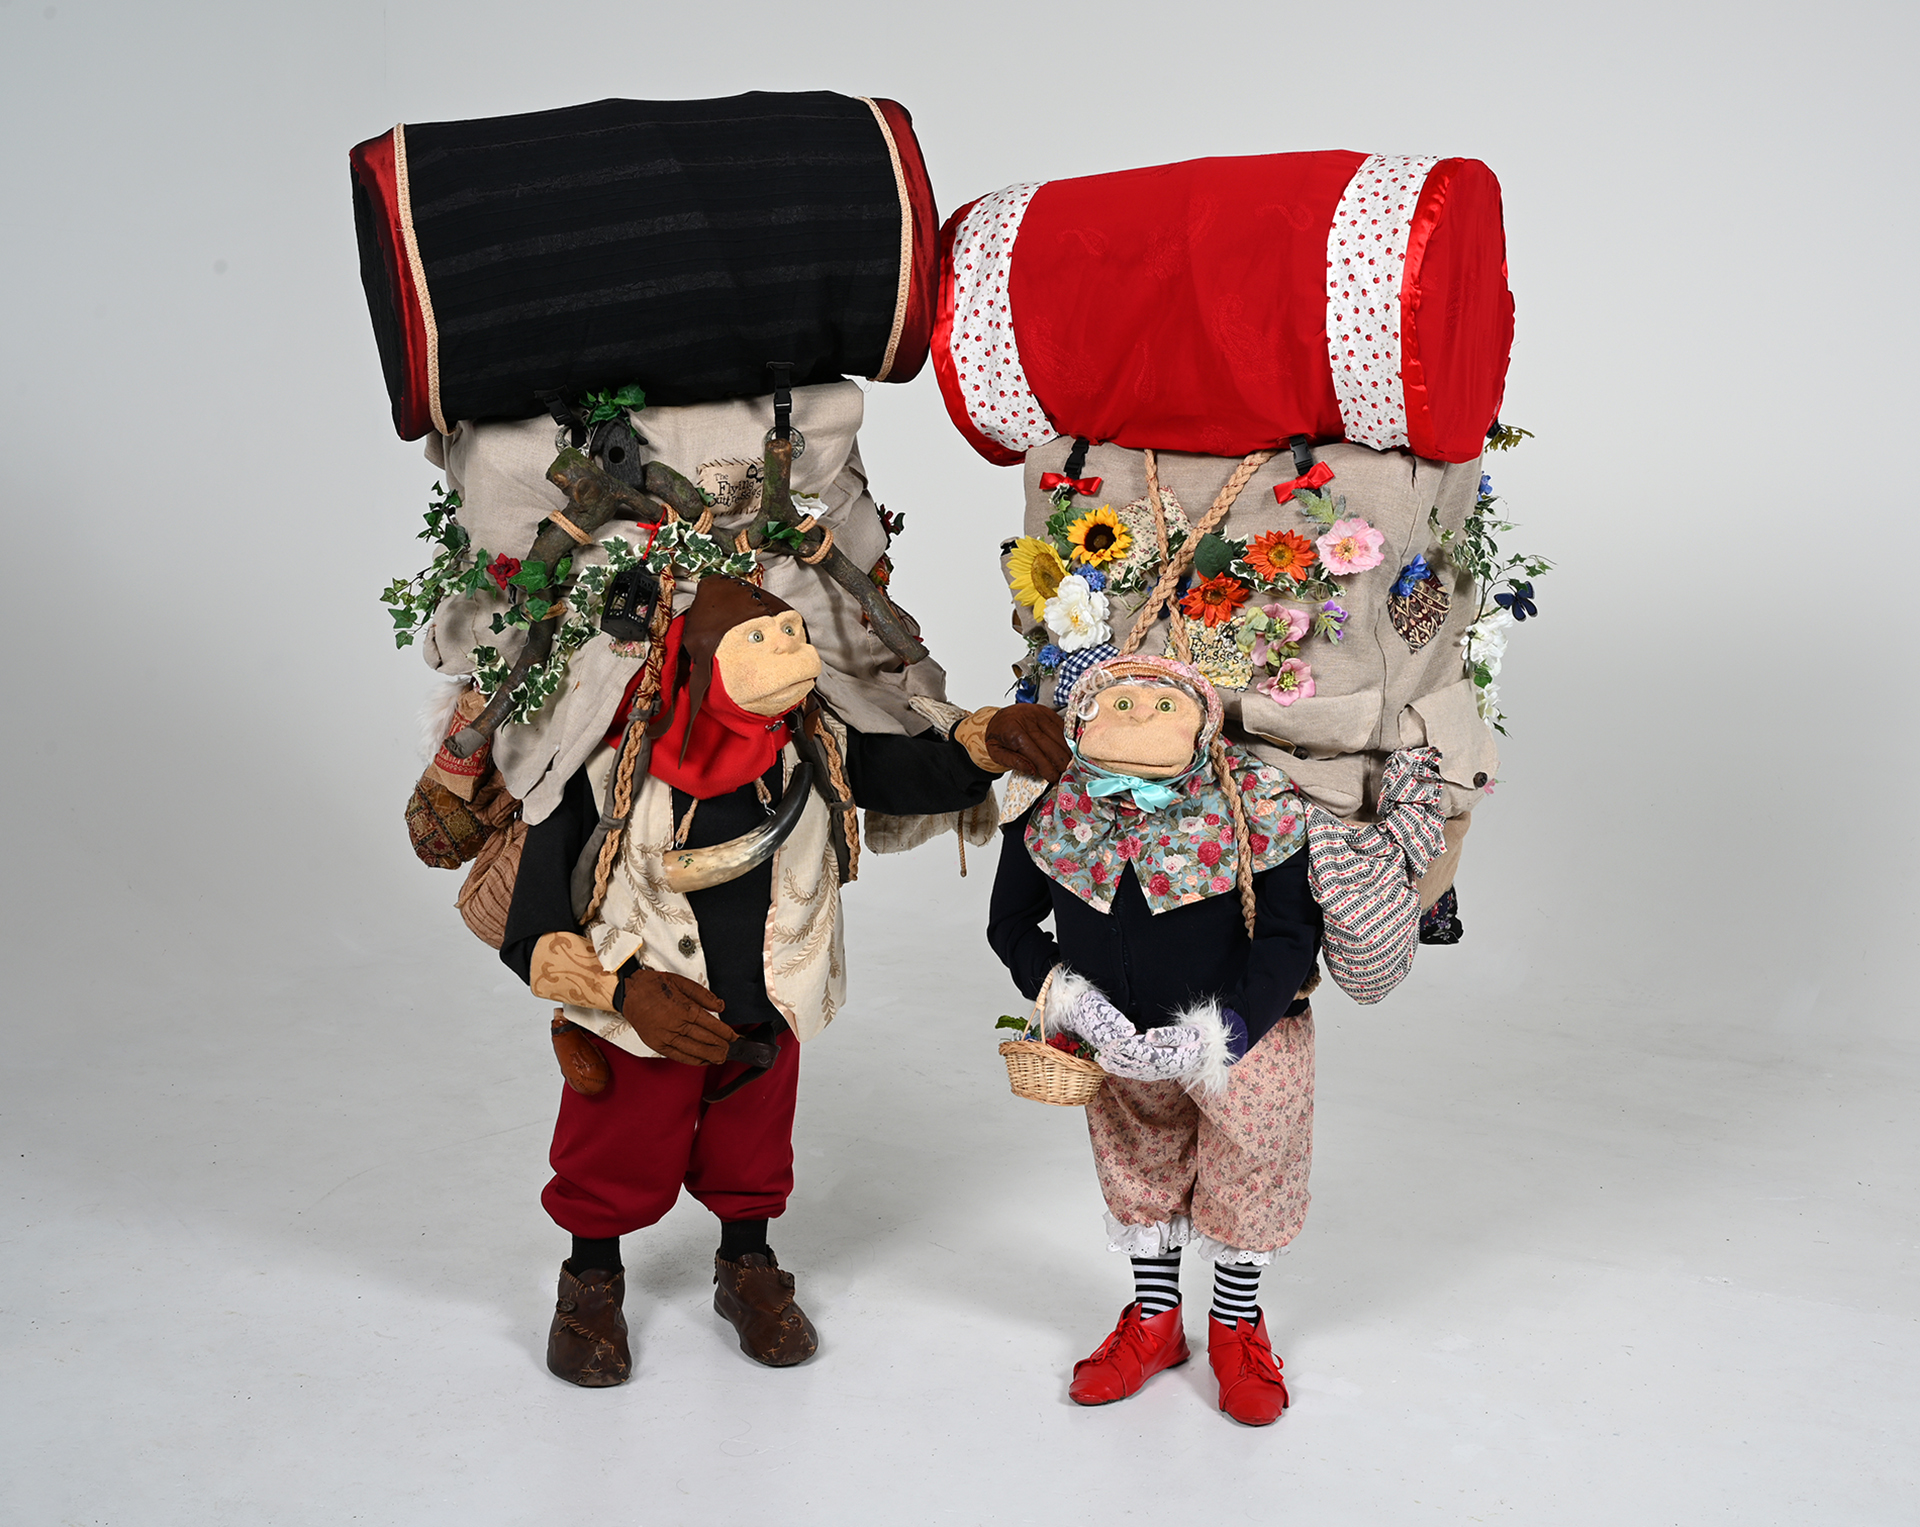 Dressed up characters carrying big backpacks 